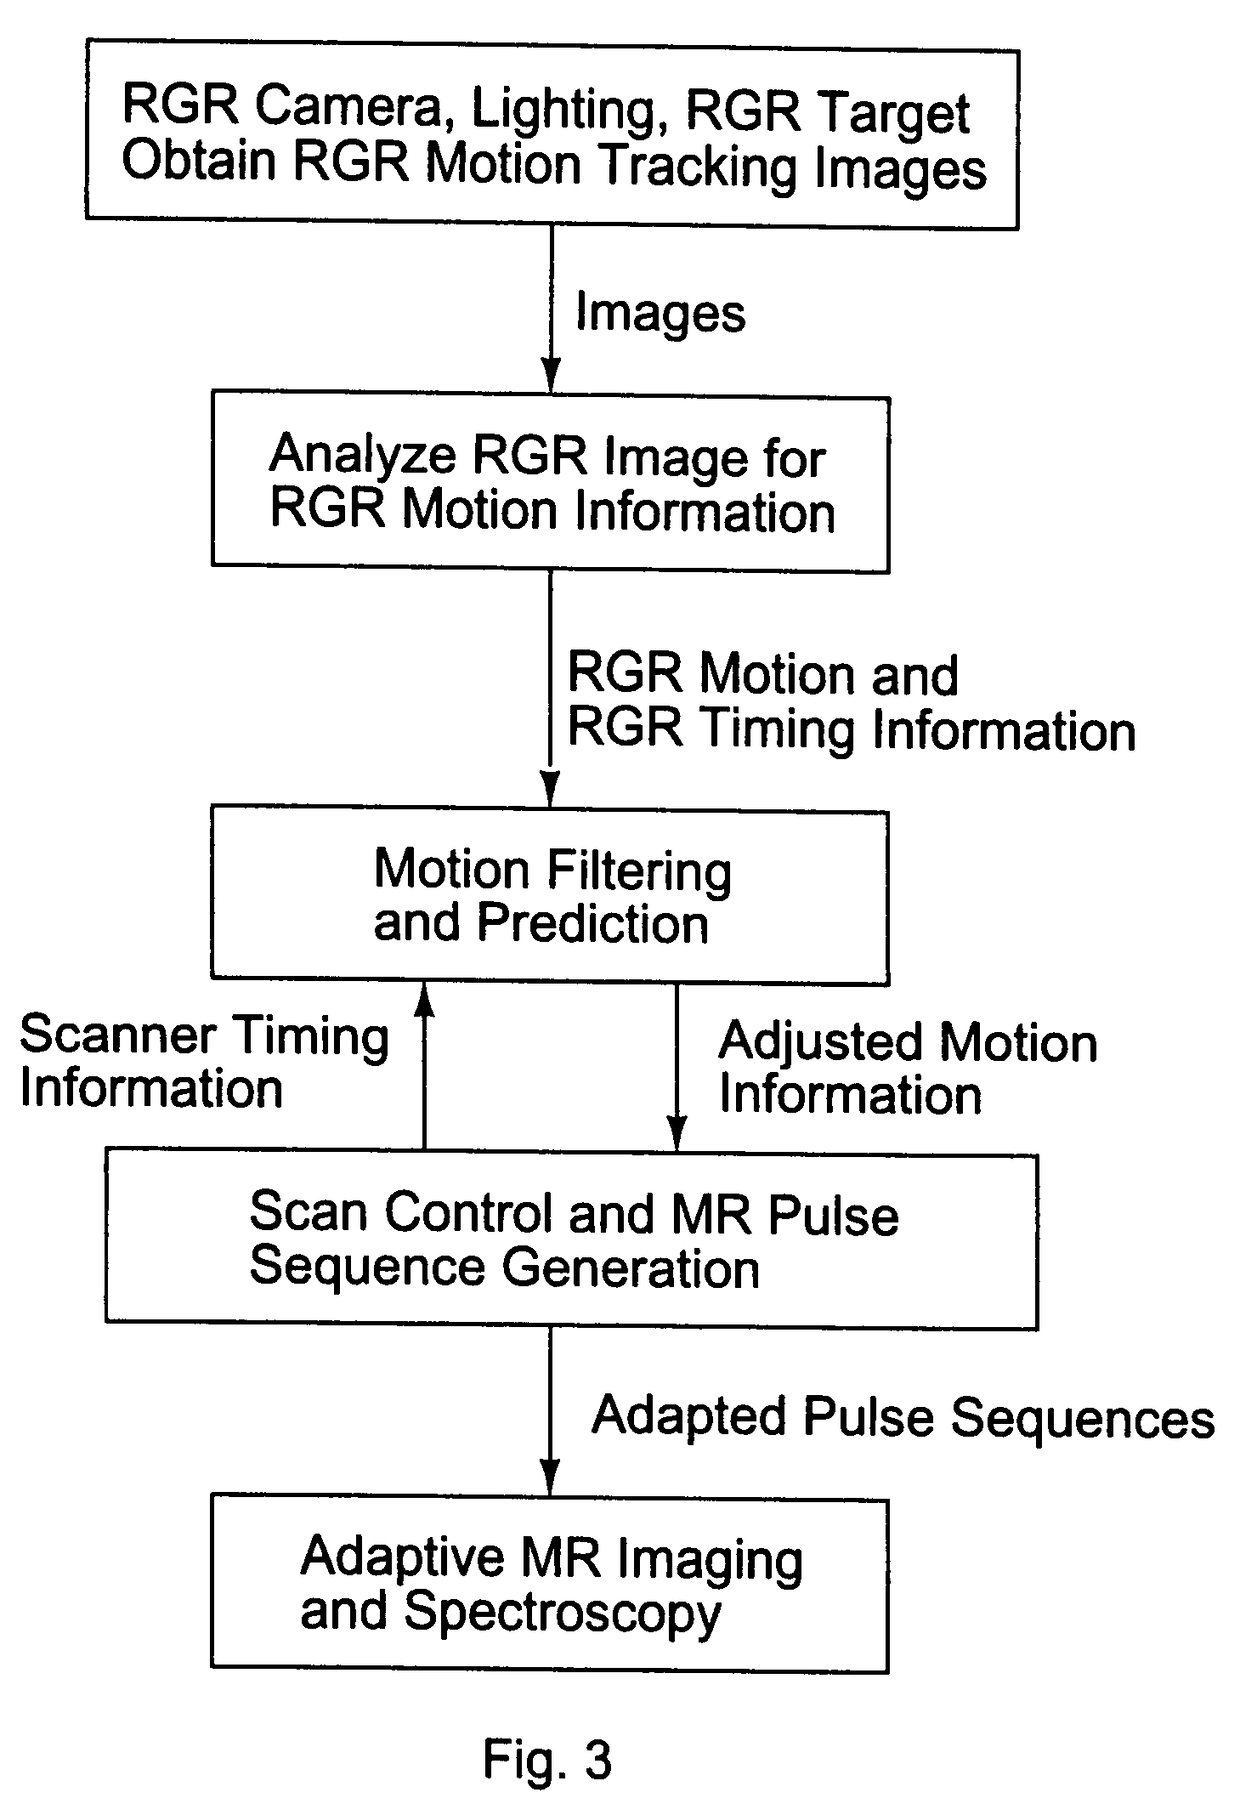 Motion tracking system for real time adaptive imaging and spectroscopy